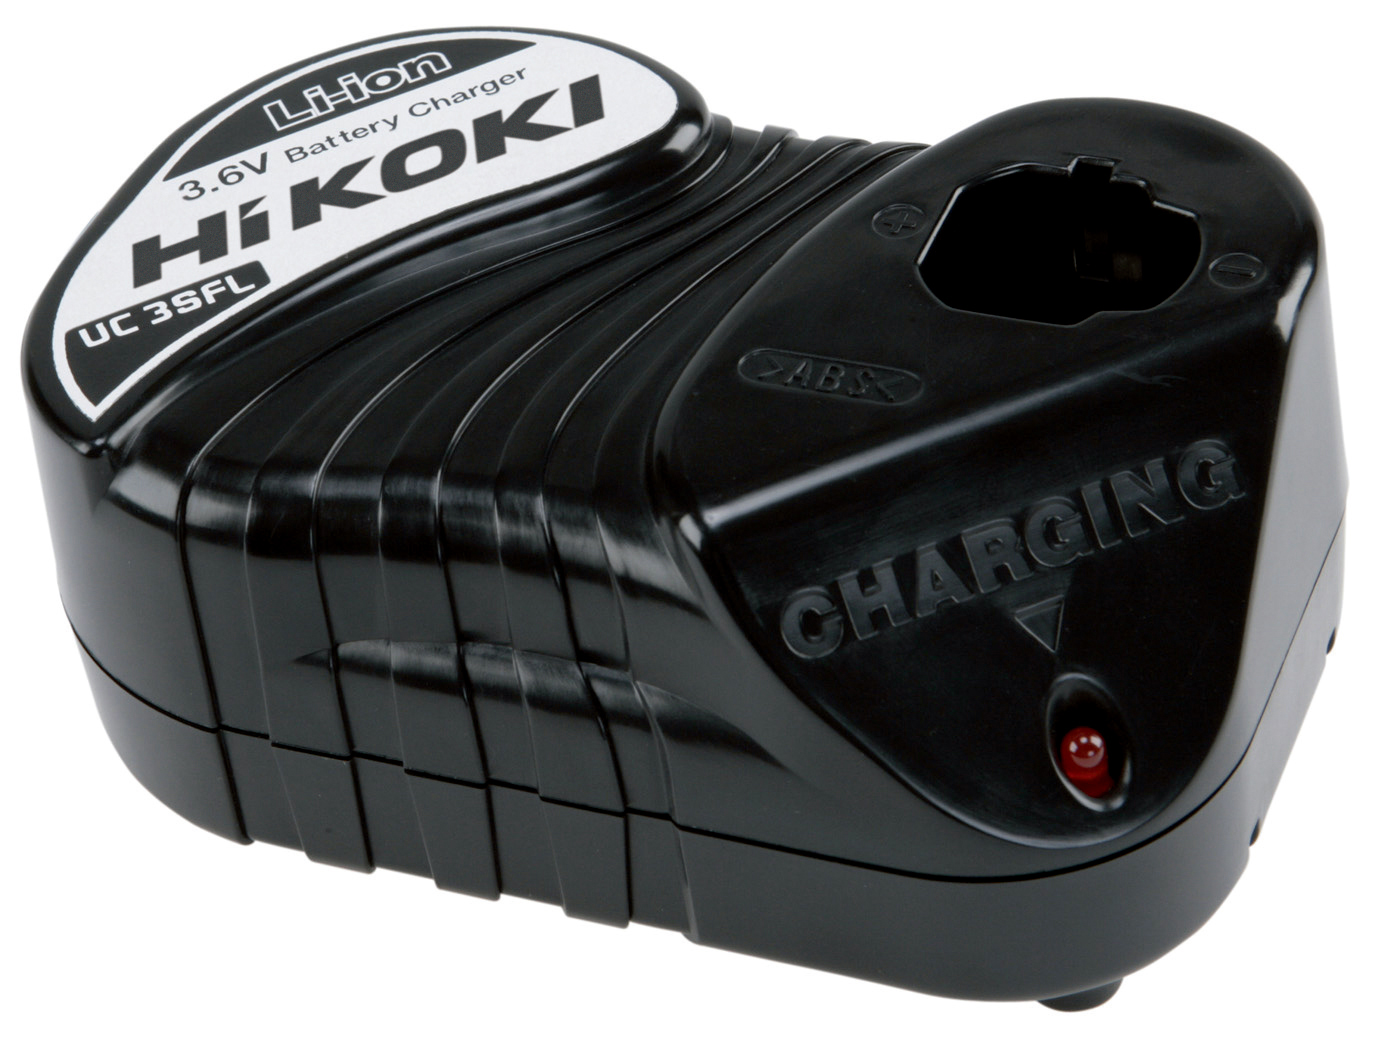 UC3SFL 3.6V Charger